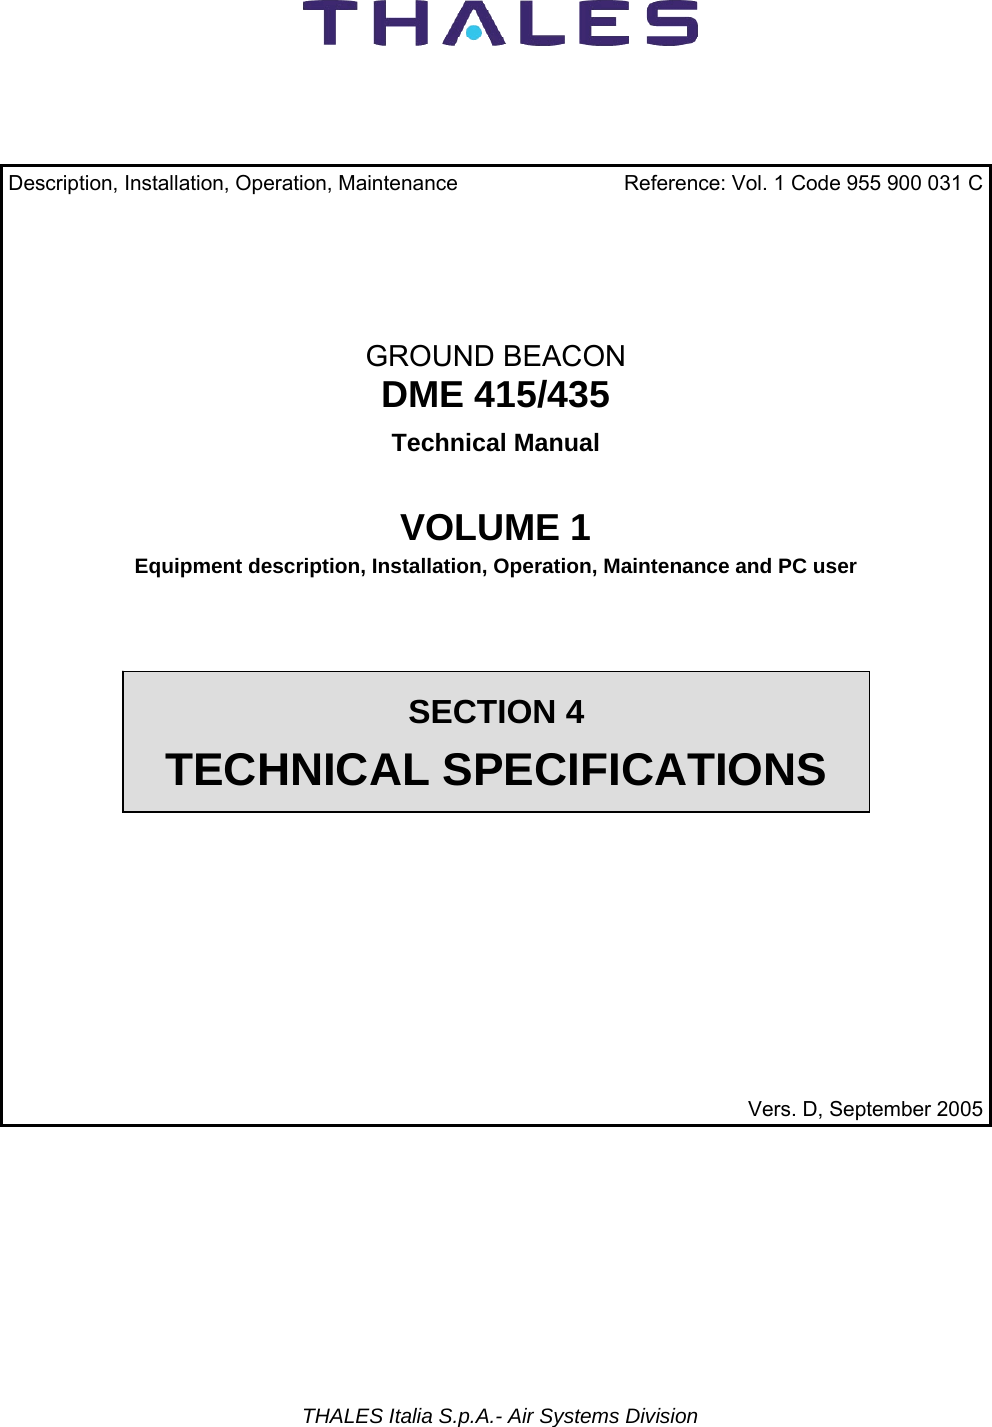           THALES Italia S.p.A.- Air Systems Division     Description, Installation, Operation, Maintenance    Reference: Vol. 1 Code 955 900 031 C      GROUND BEACON DME 415/435 Technical Manual   VOLUME 1 Equipment description, Installation, Operation, Maintenance and PC user   Vers. D, September 2005 SECTION 4 TECHNICAL SPECIFICATIONS 